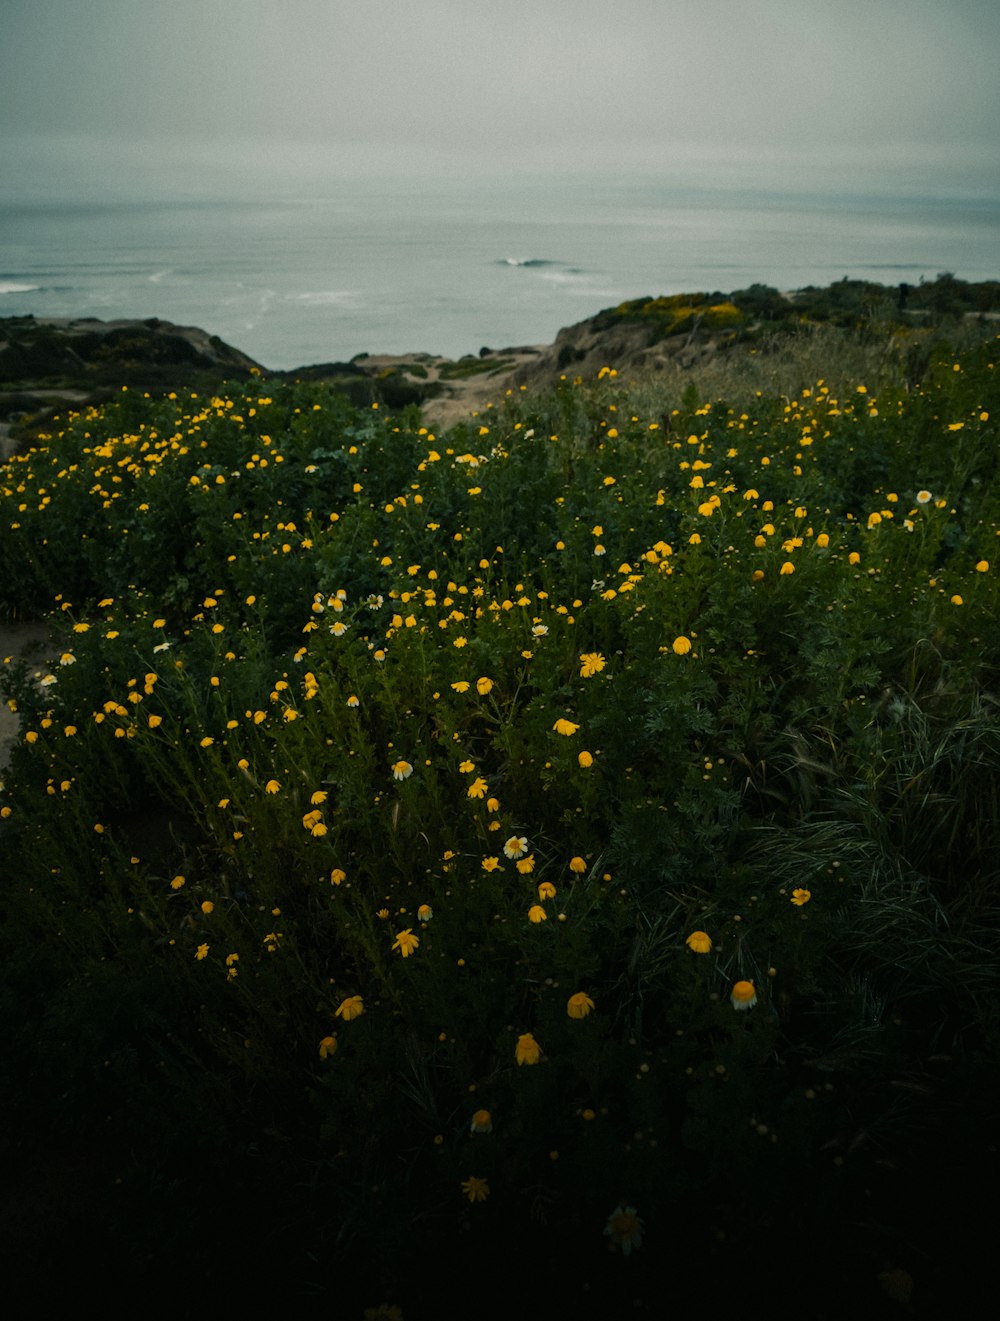 a field of yellow flowers with a body of water in the background